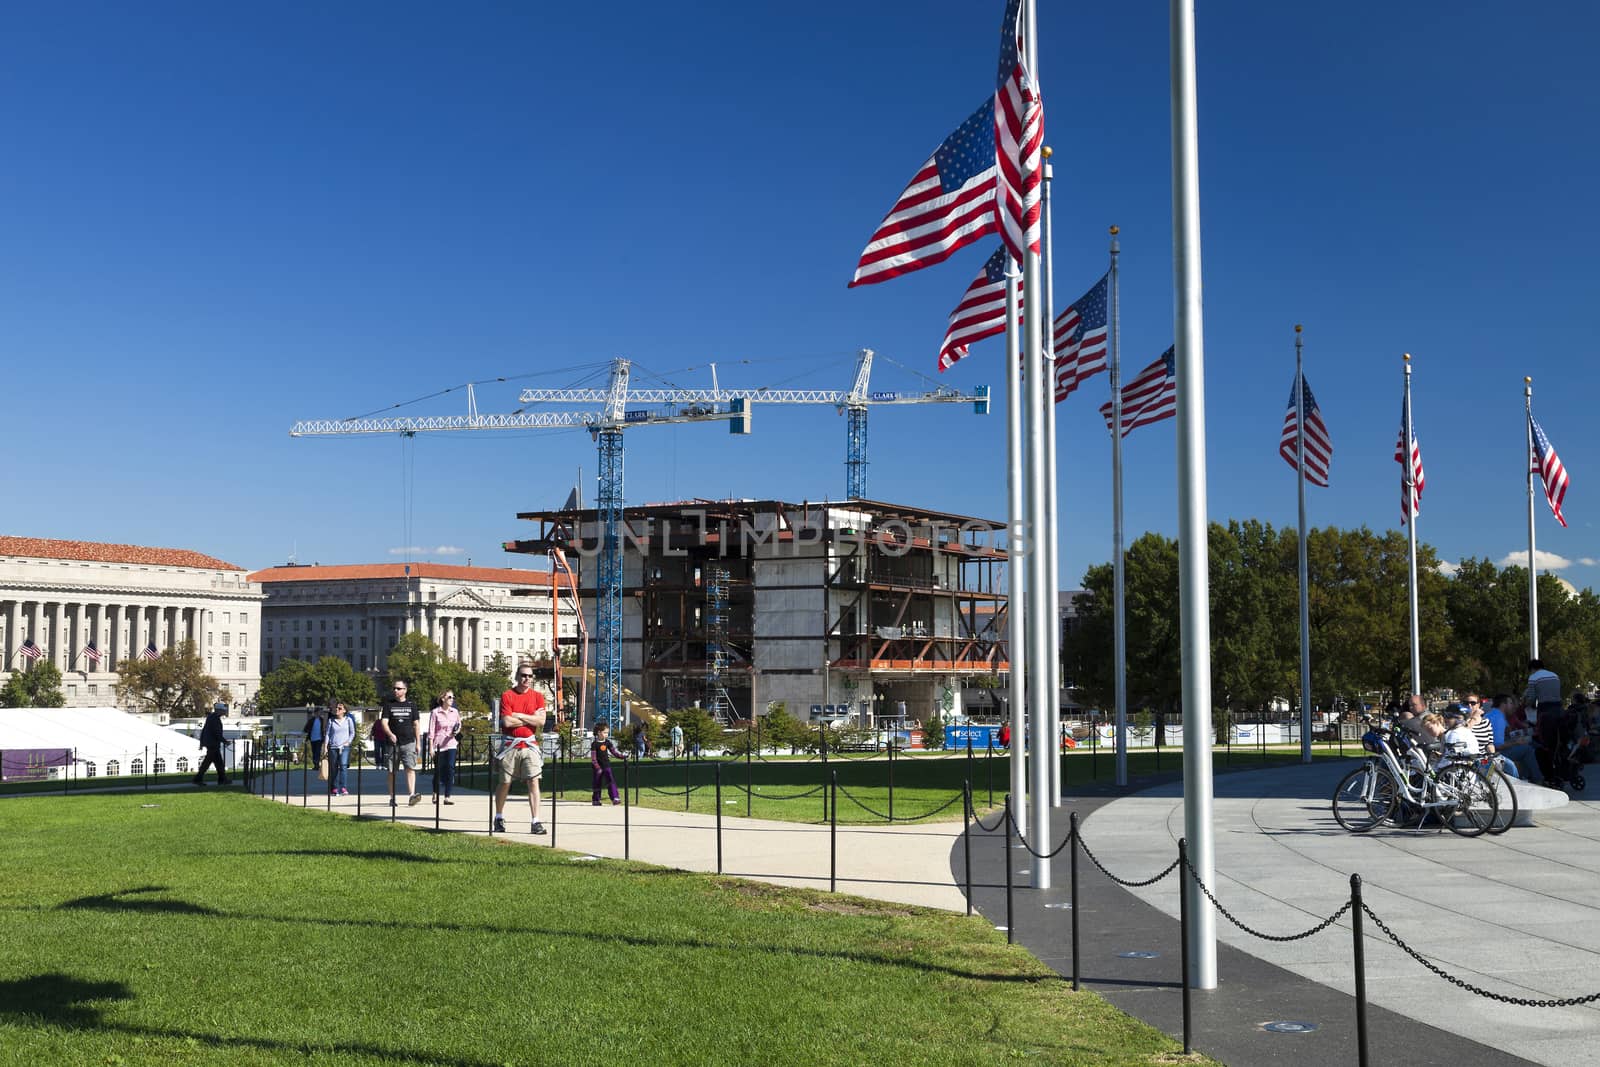 Washington D.C., USA - October 17, 2014: Scheduled to open in 2016, the Afro American Museum is under construction on the National Mall in Washington, D.C., USA